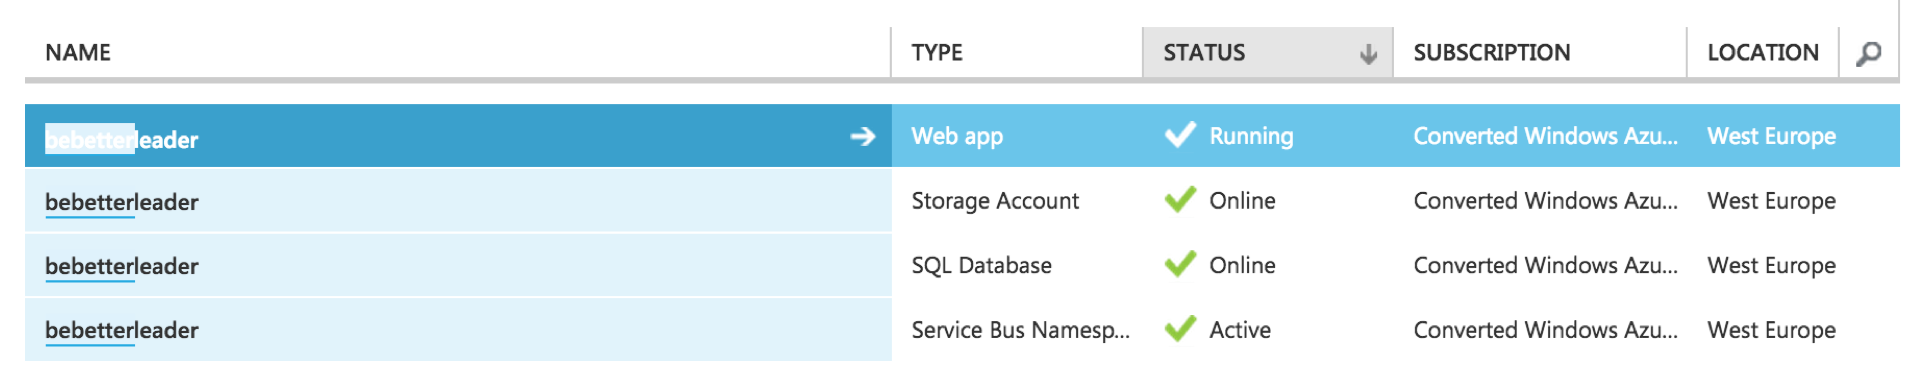 Azure sevices in use